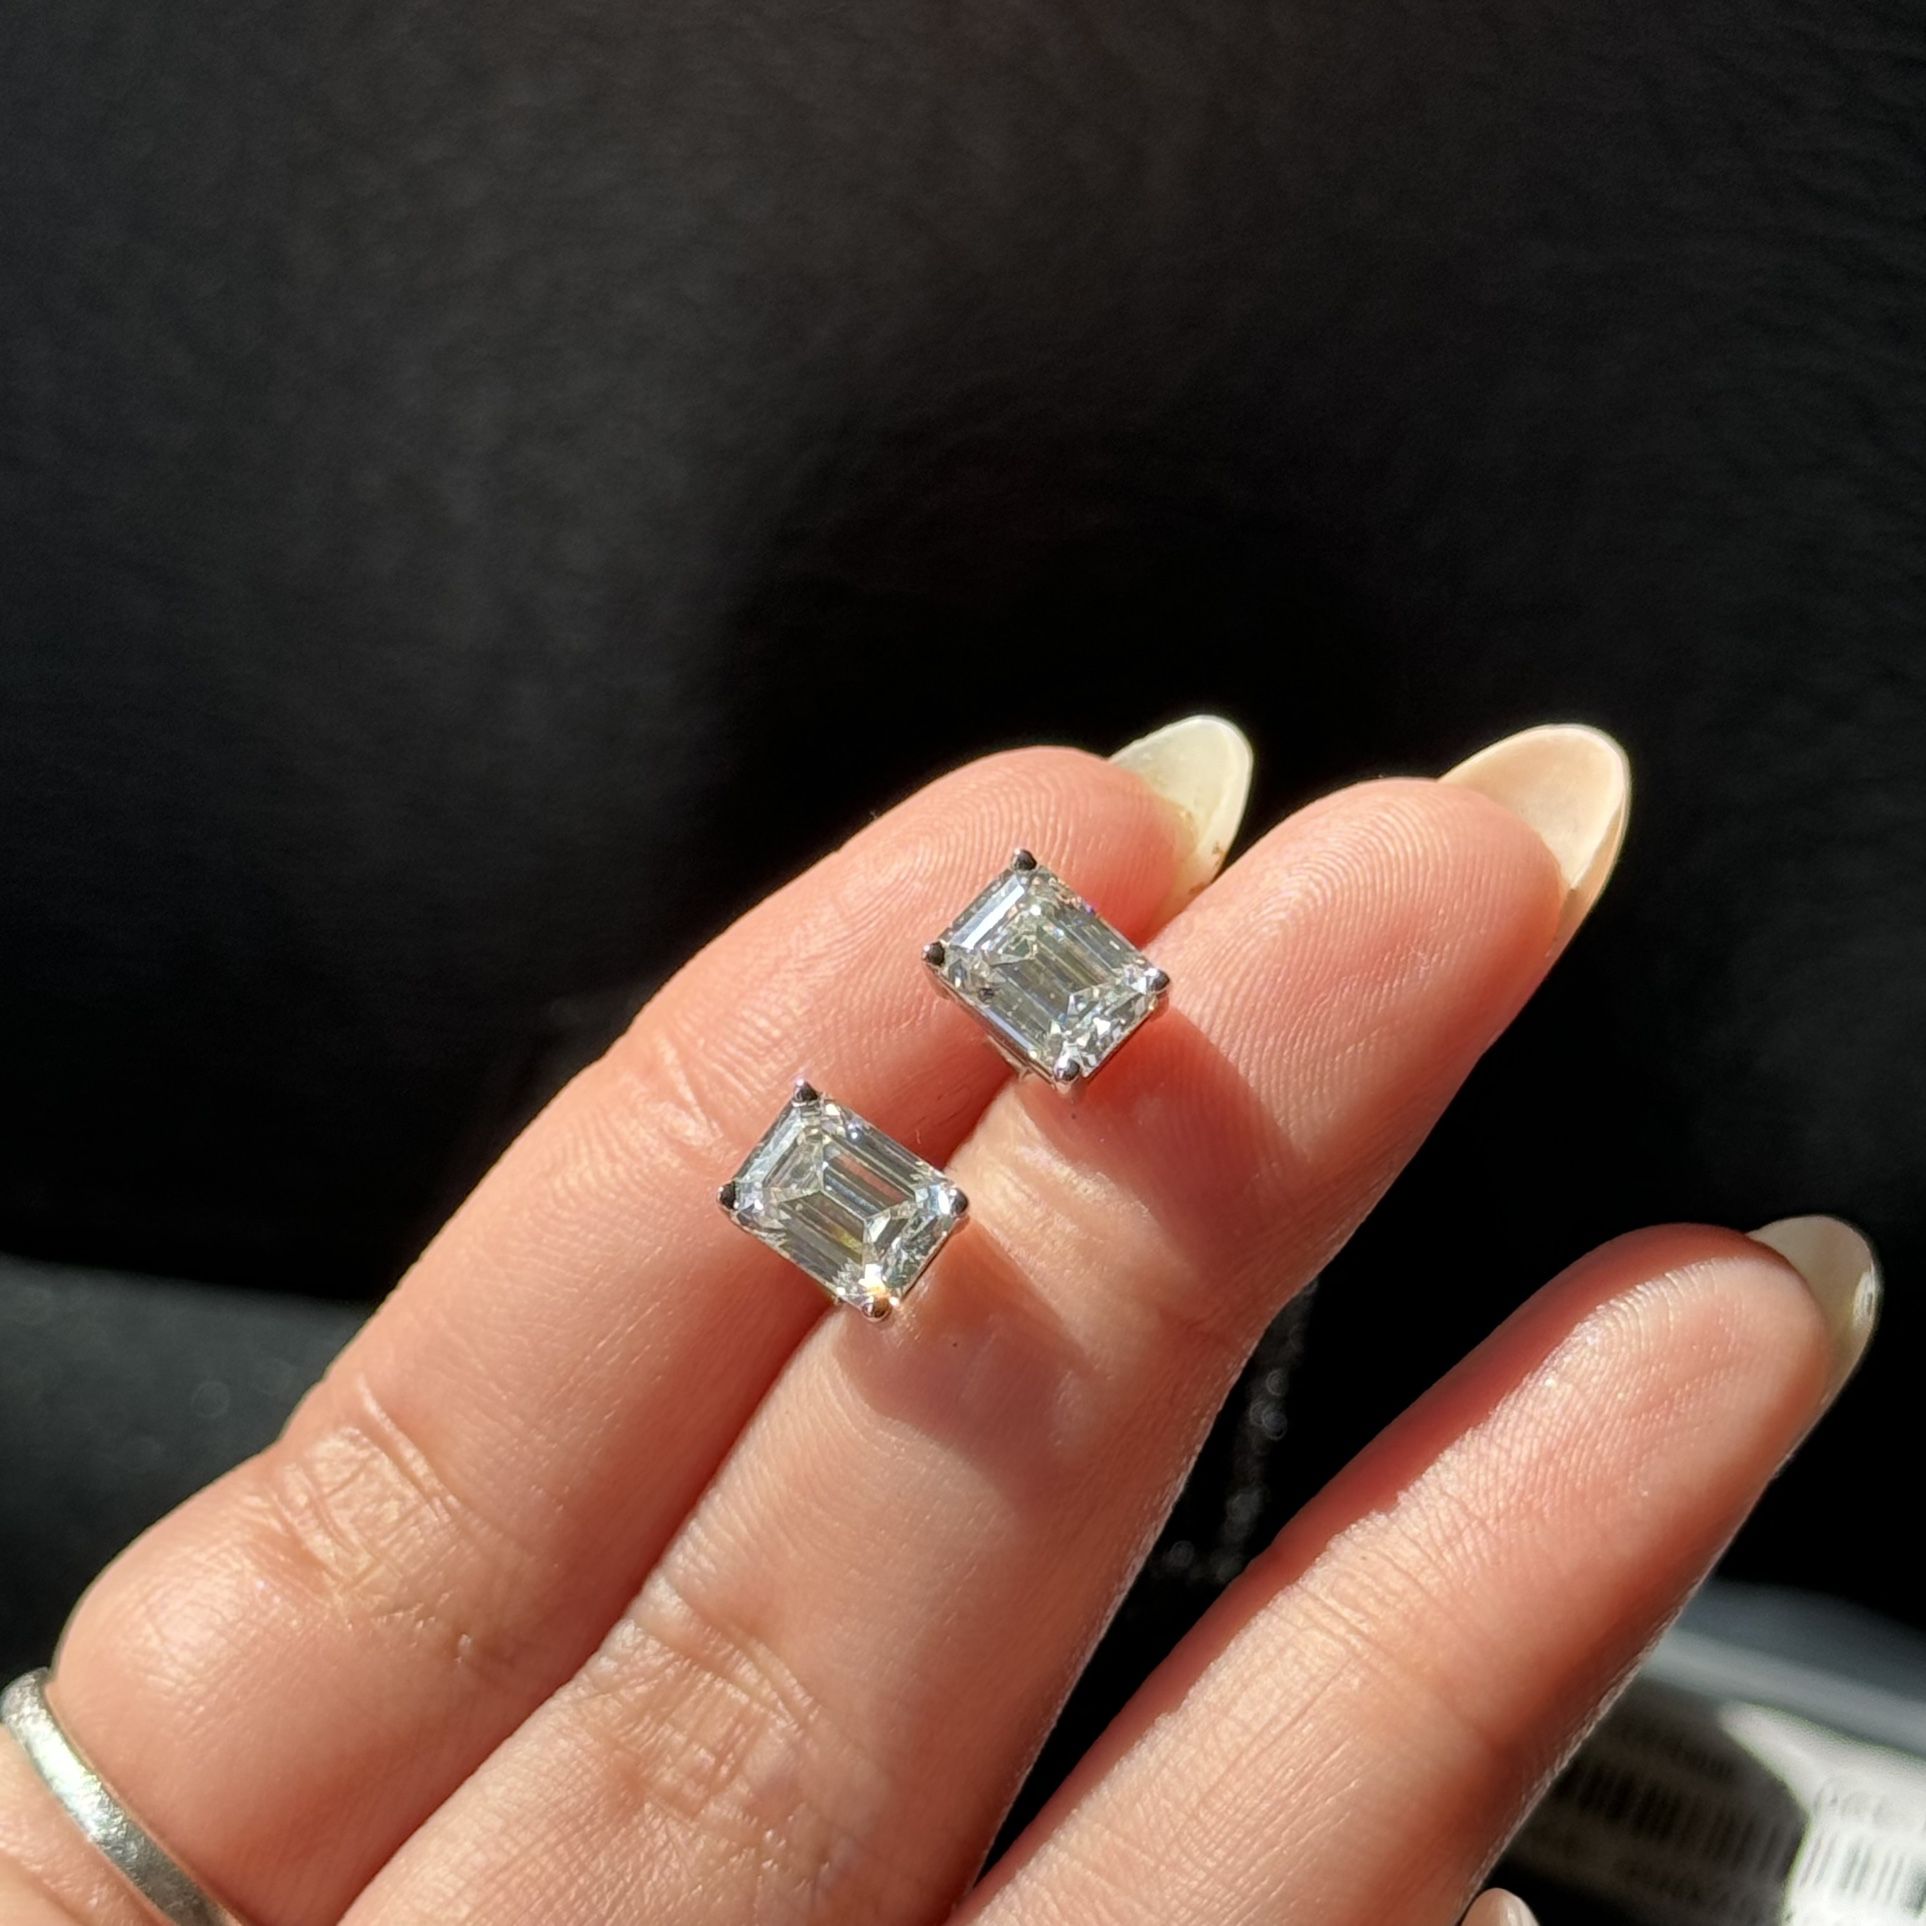 4cttw emerald cut moissanite certified 10k gold post and 925 earrings